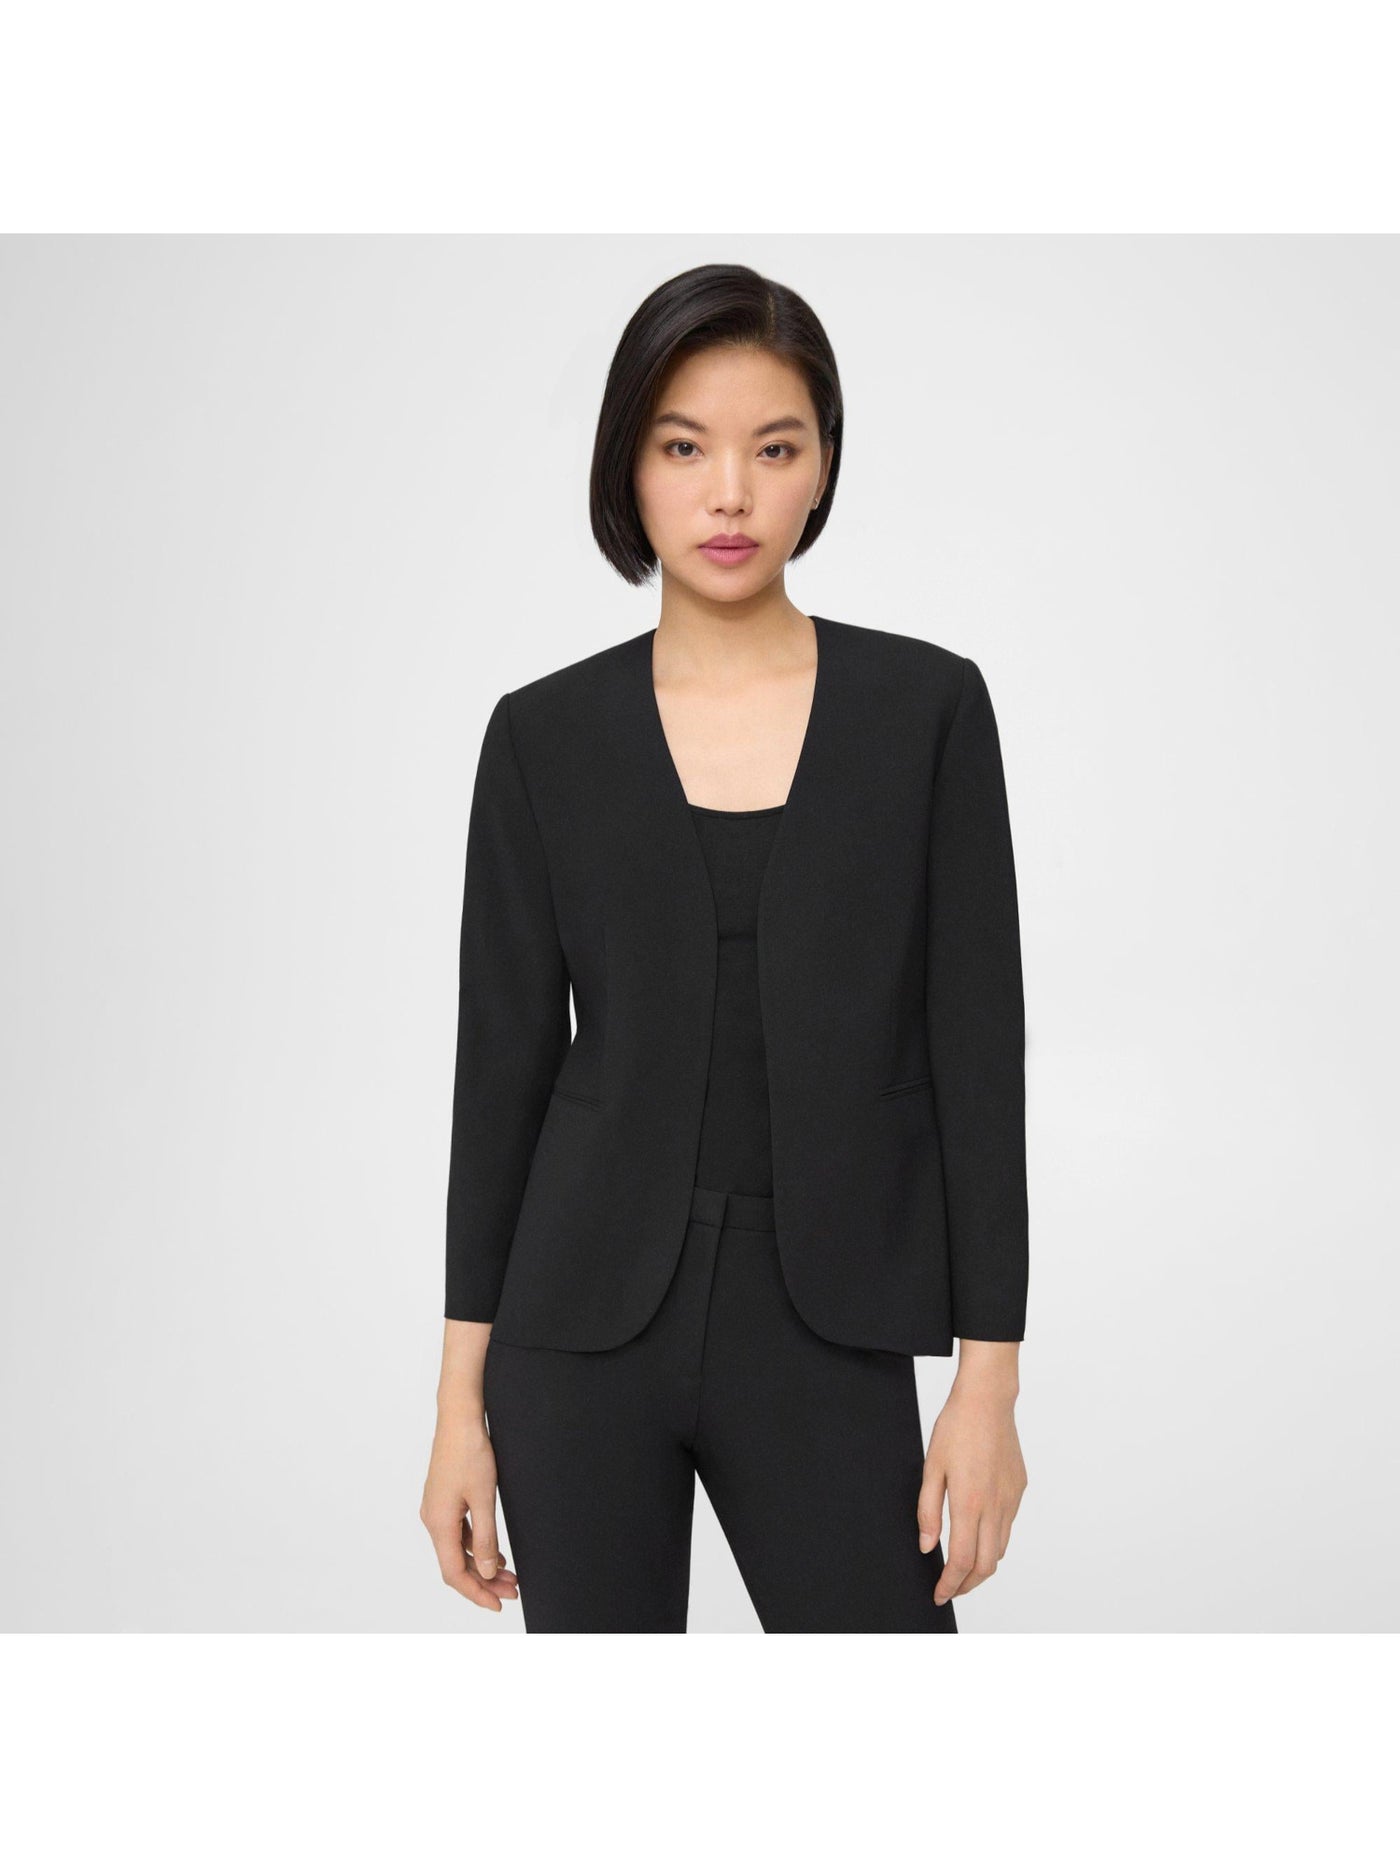 THEORY Womens Black Open Front Pocketed Lined Wear To Work Blazer Jacket 00